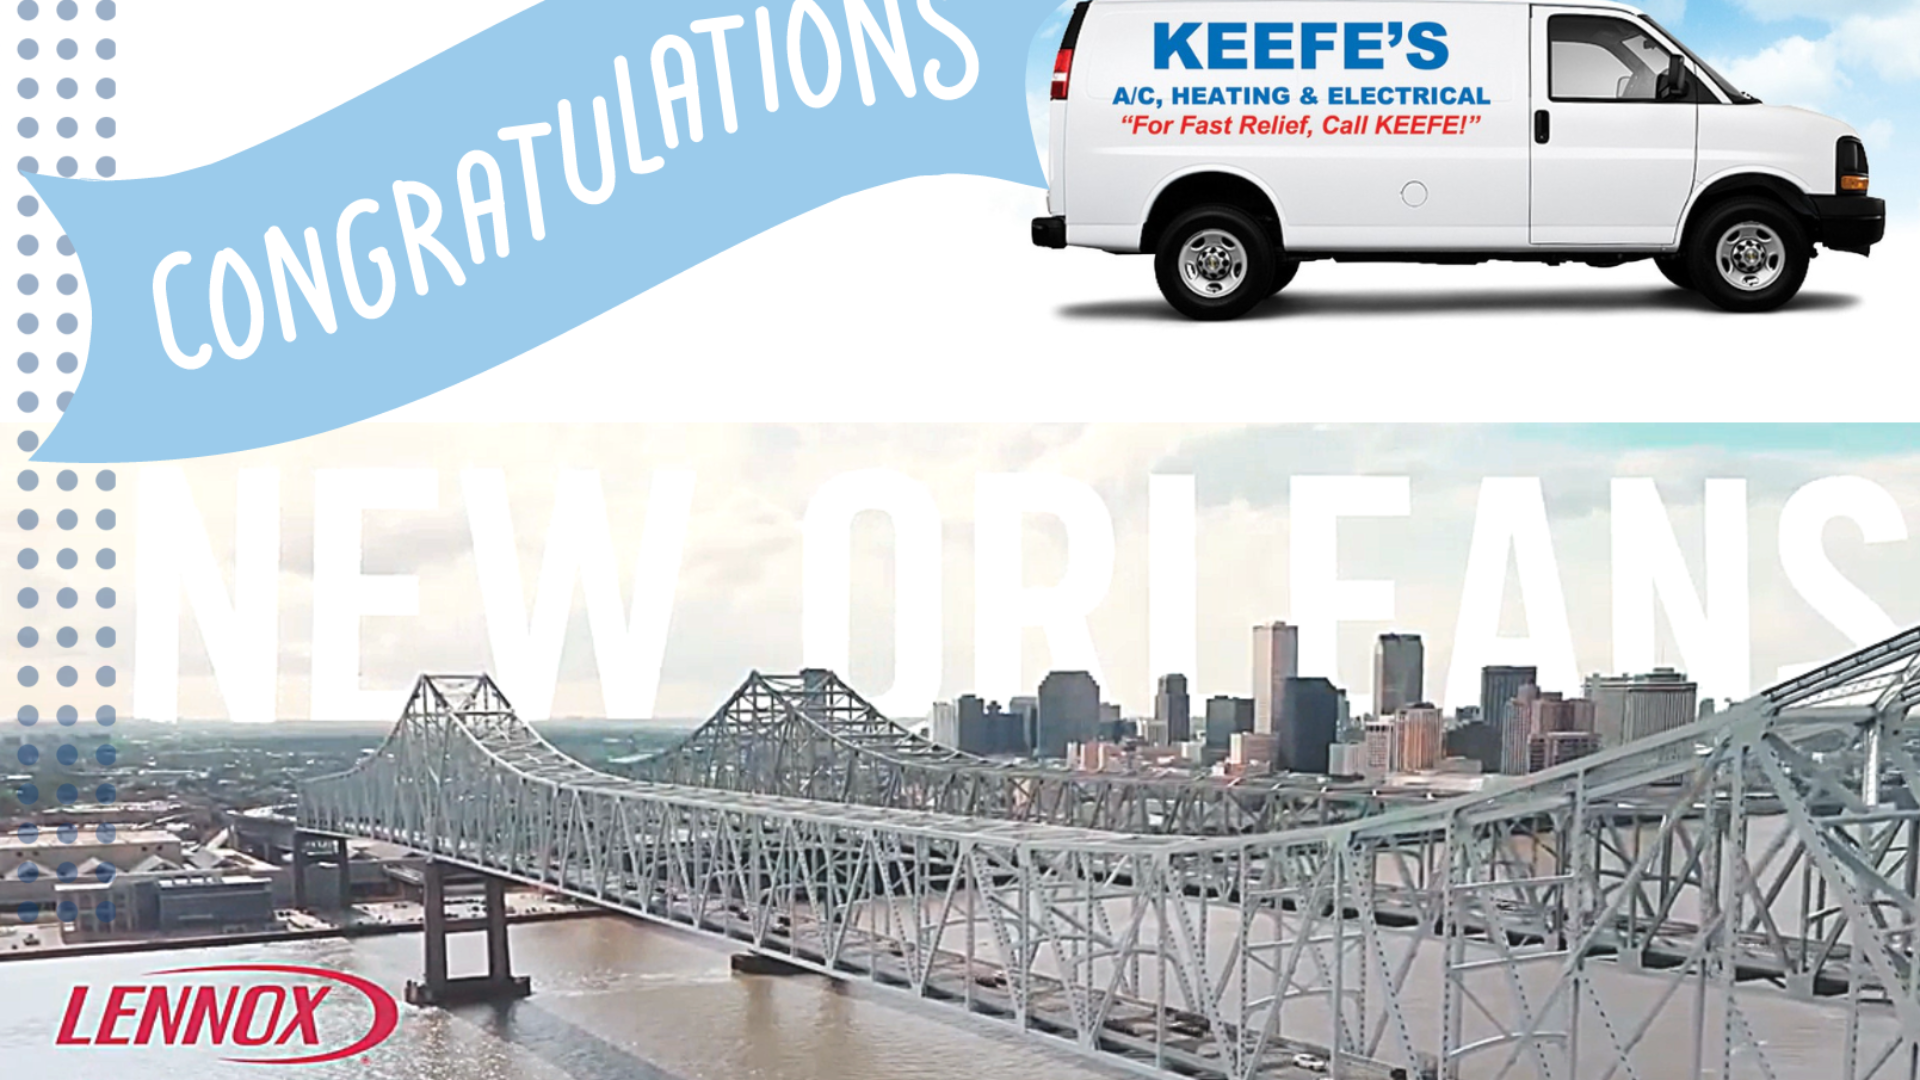 Kudos to Our Members at Keefe’s!